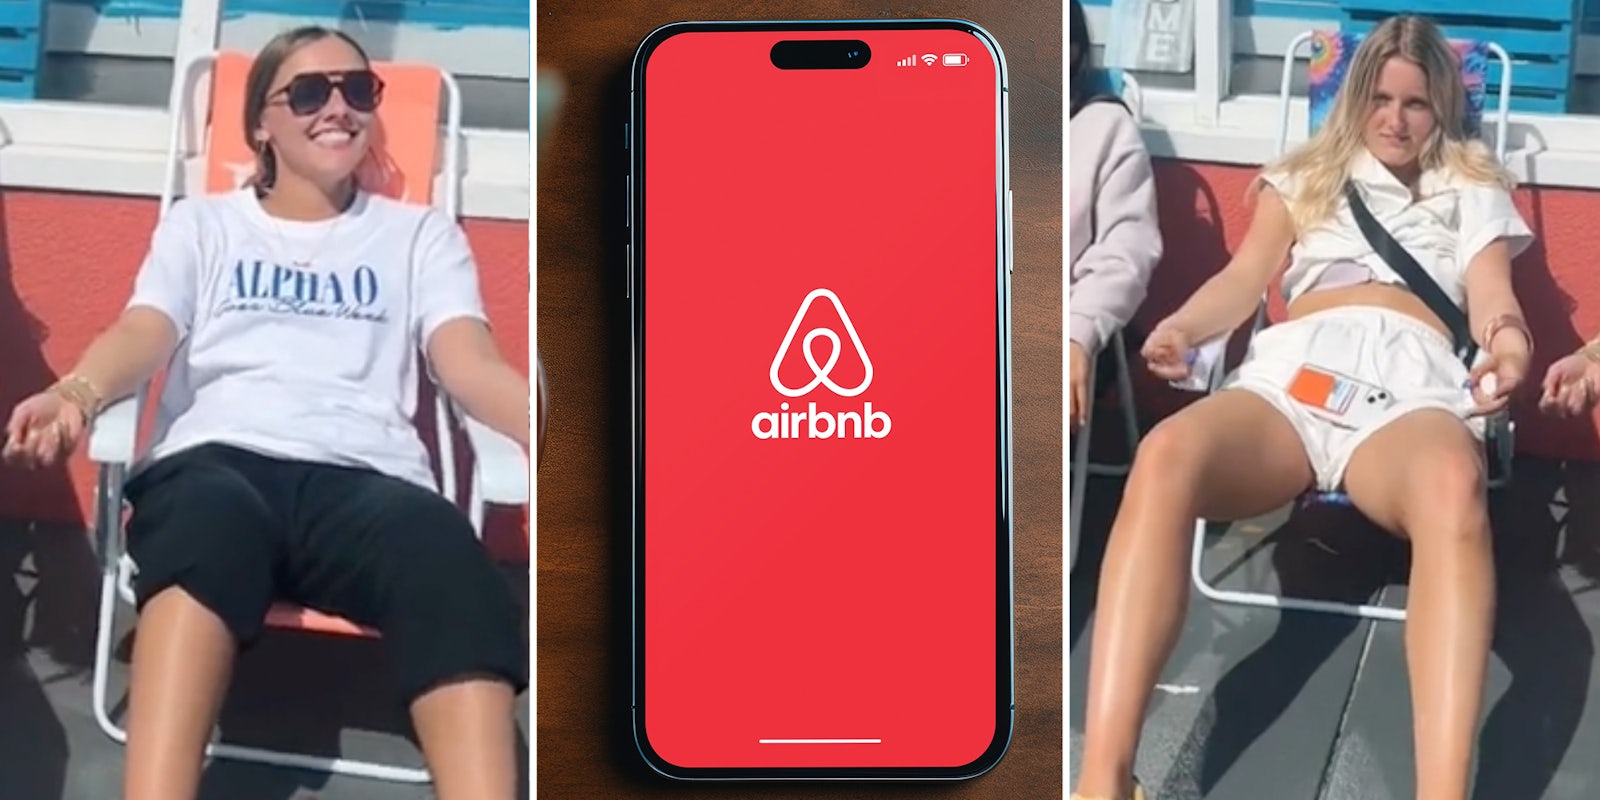 Women in chairs(l+r), Airbnb on phone(c)